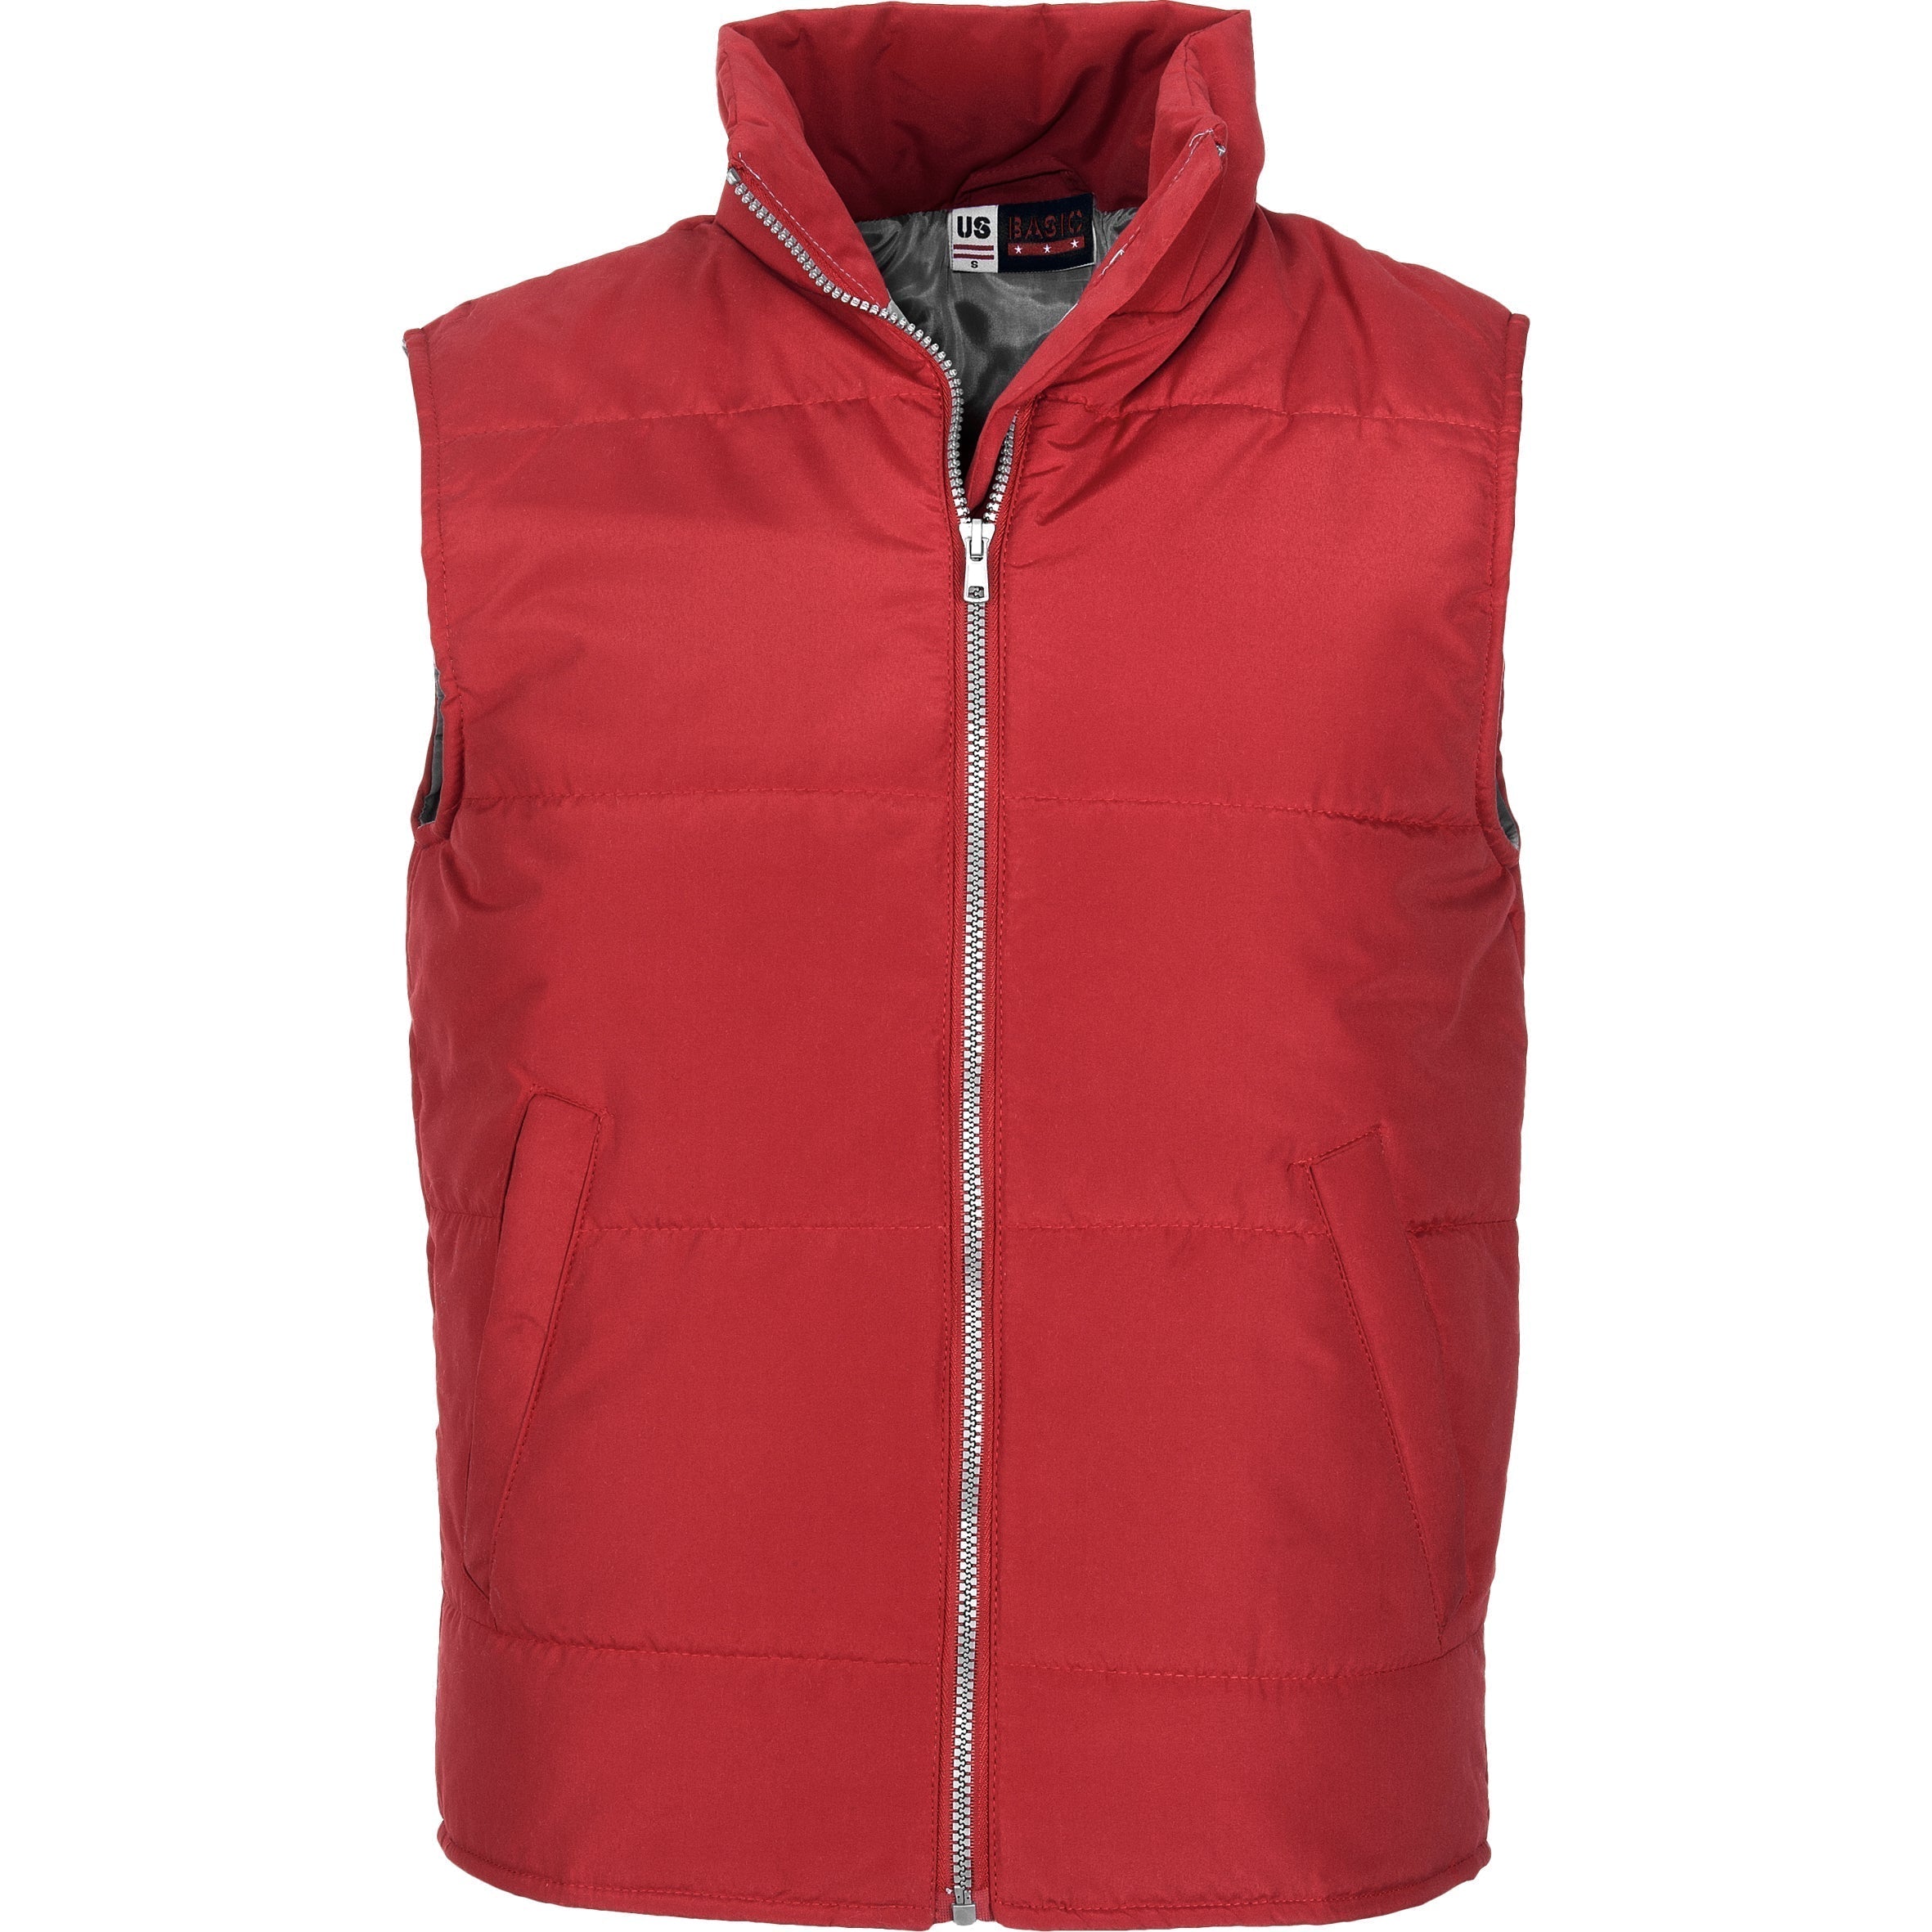 Mens Rego Bodywarmer - Red Only-L-Red-R